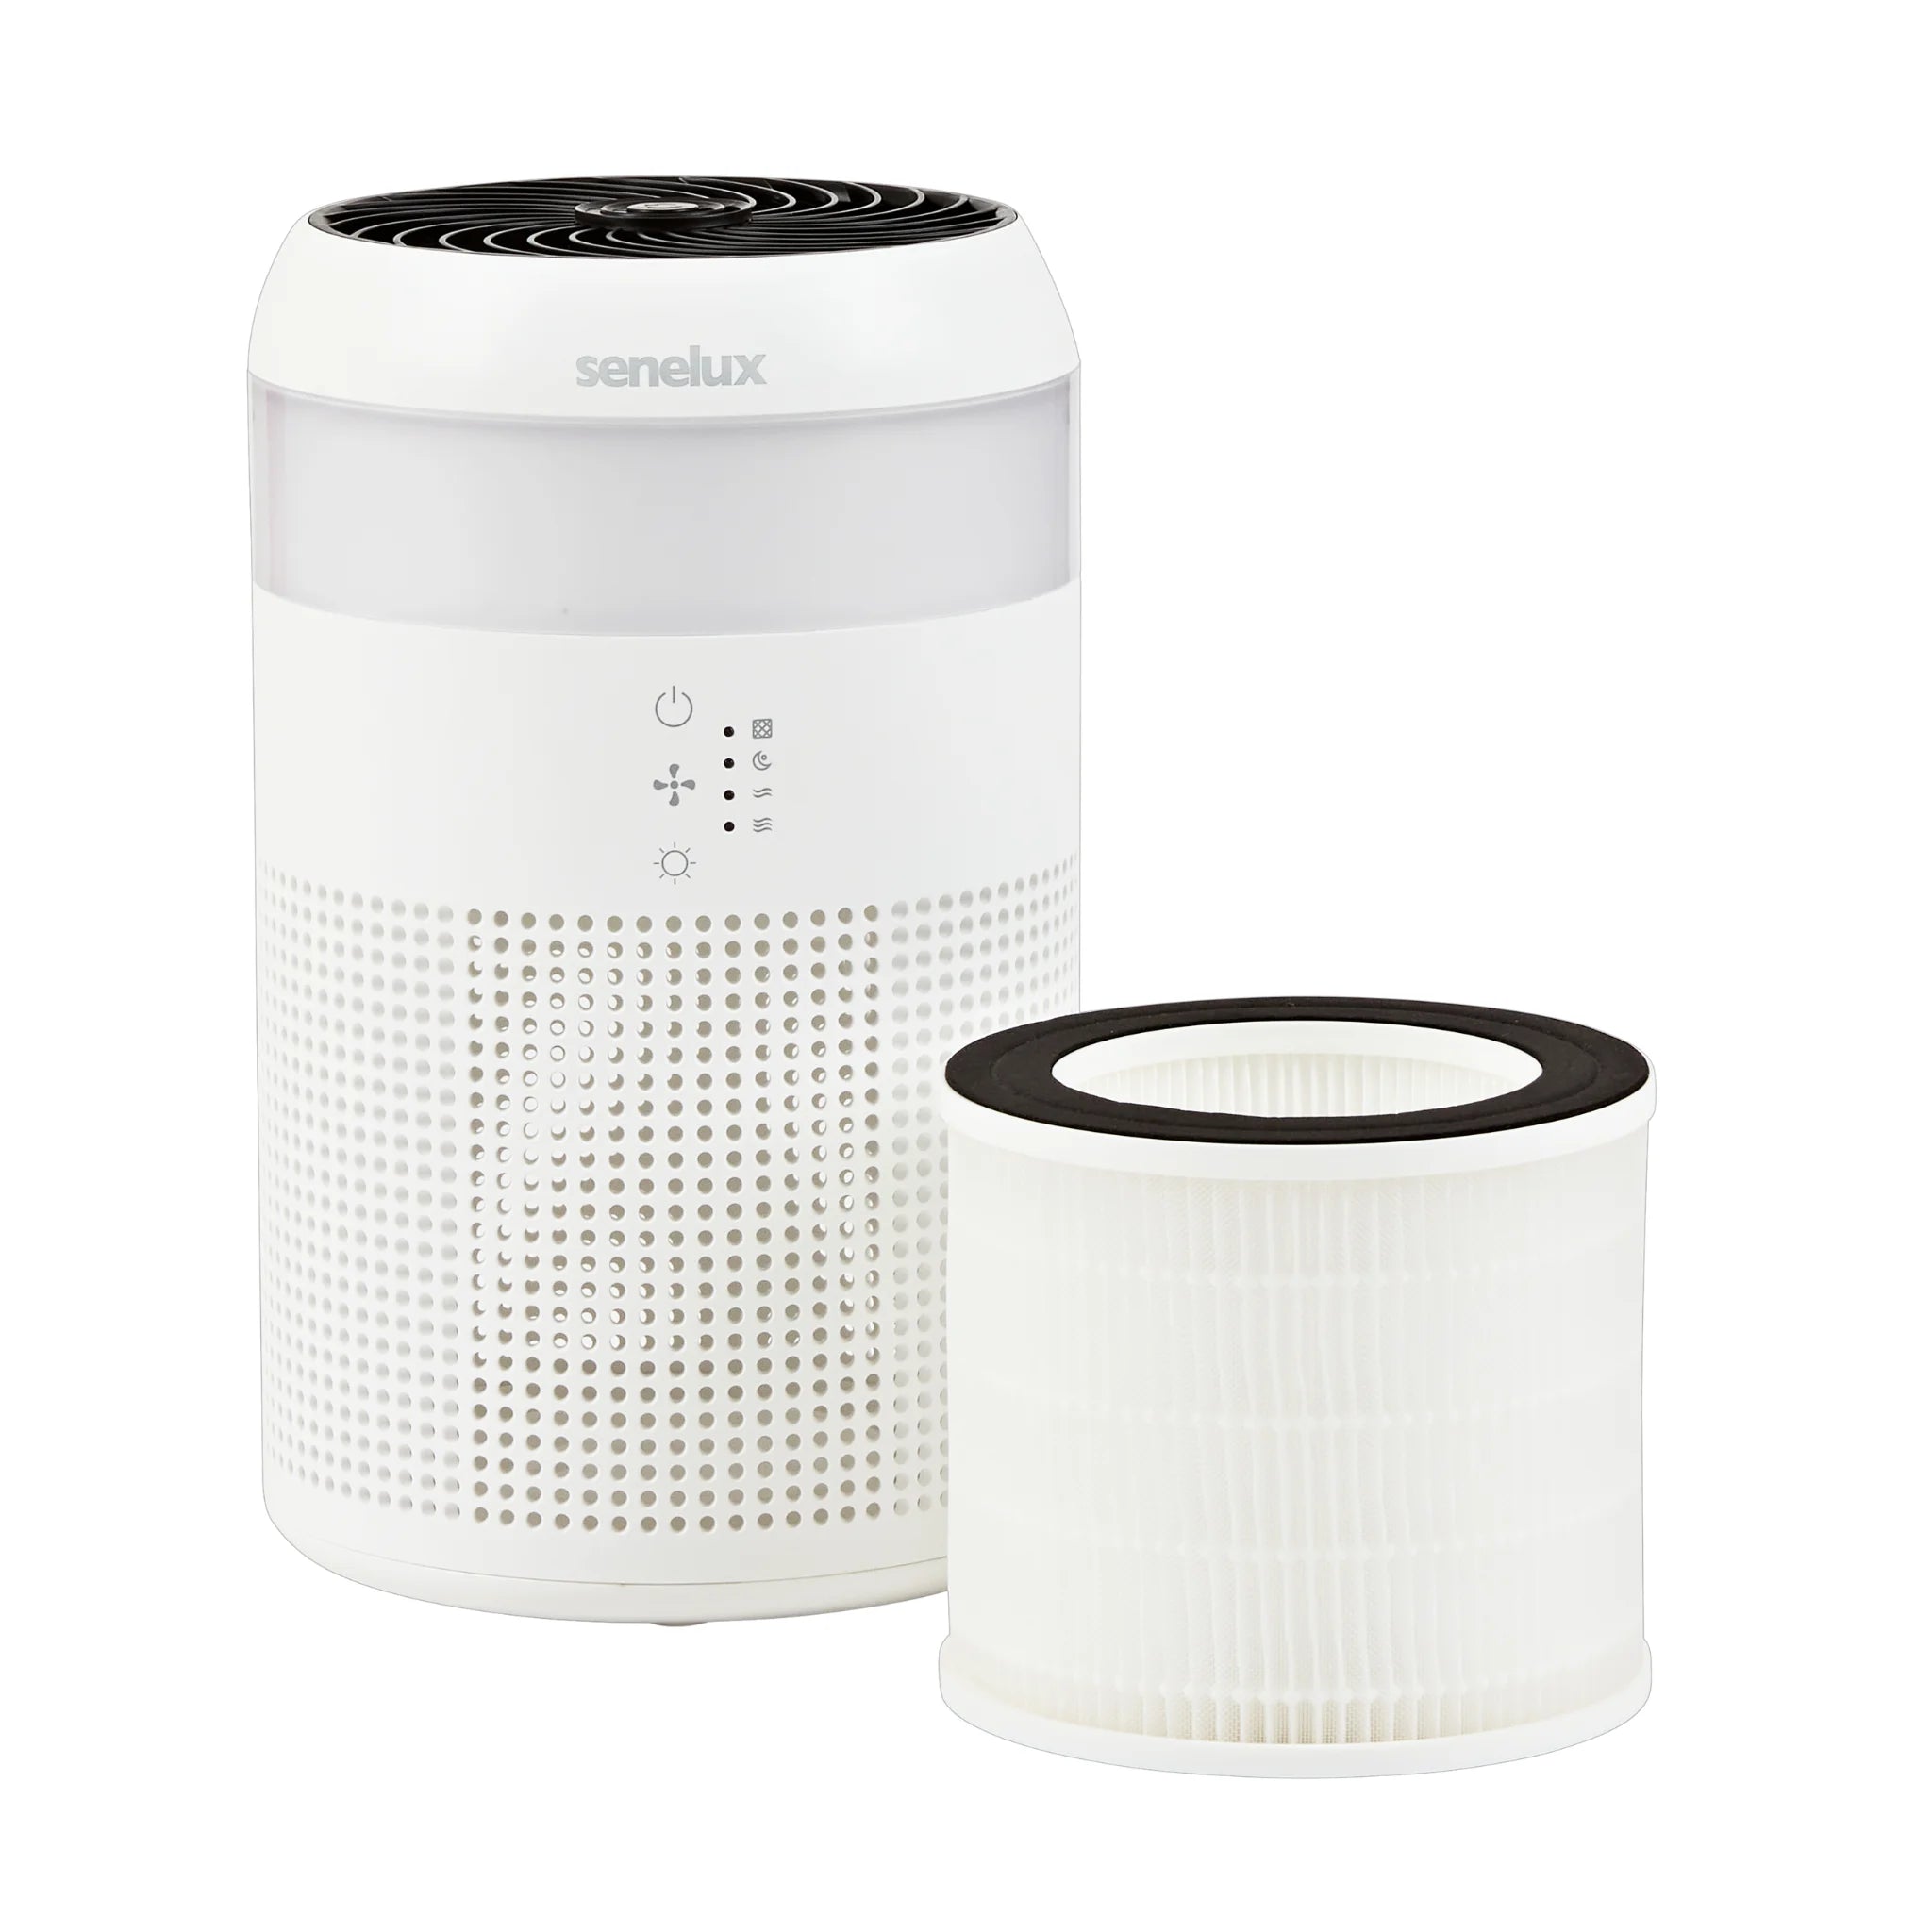 A Senelux HEPA Air Purifier with easily replaceable HEPA filter outside of the air purifier itself.